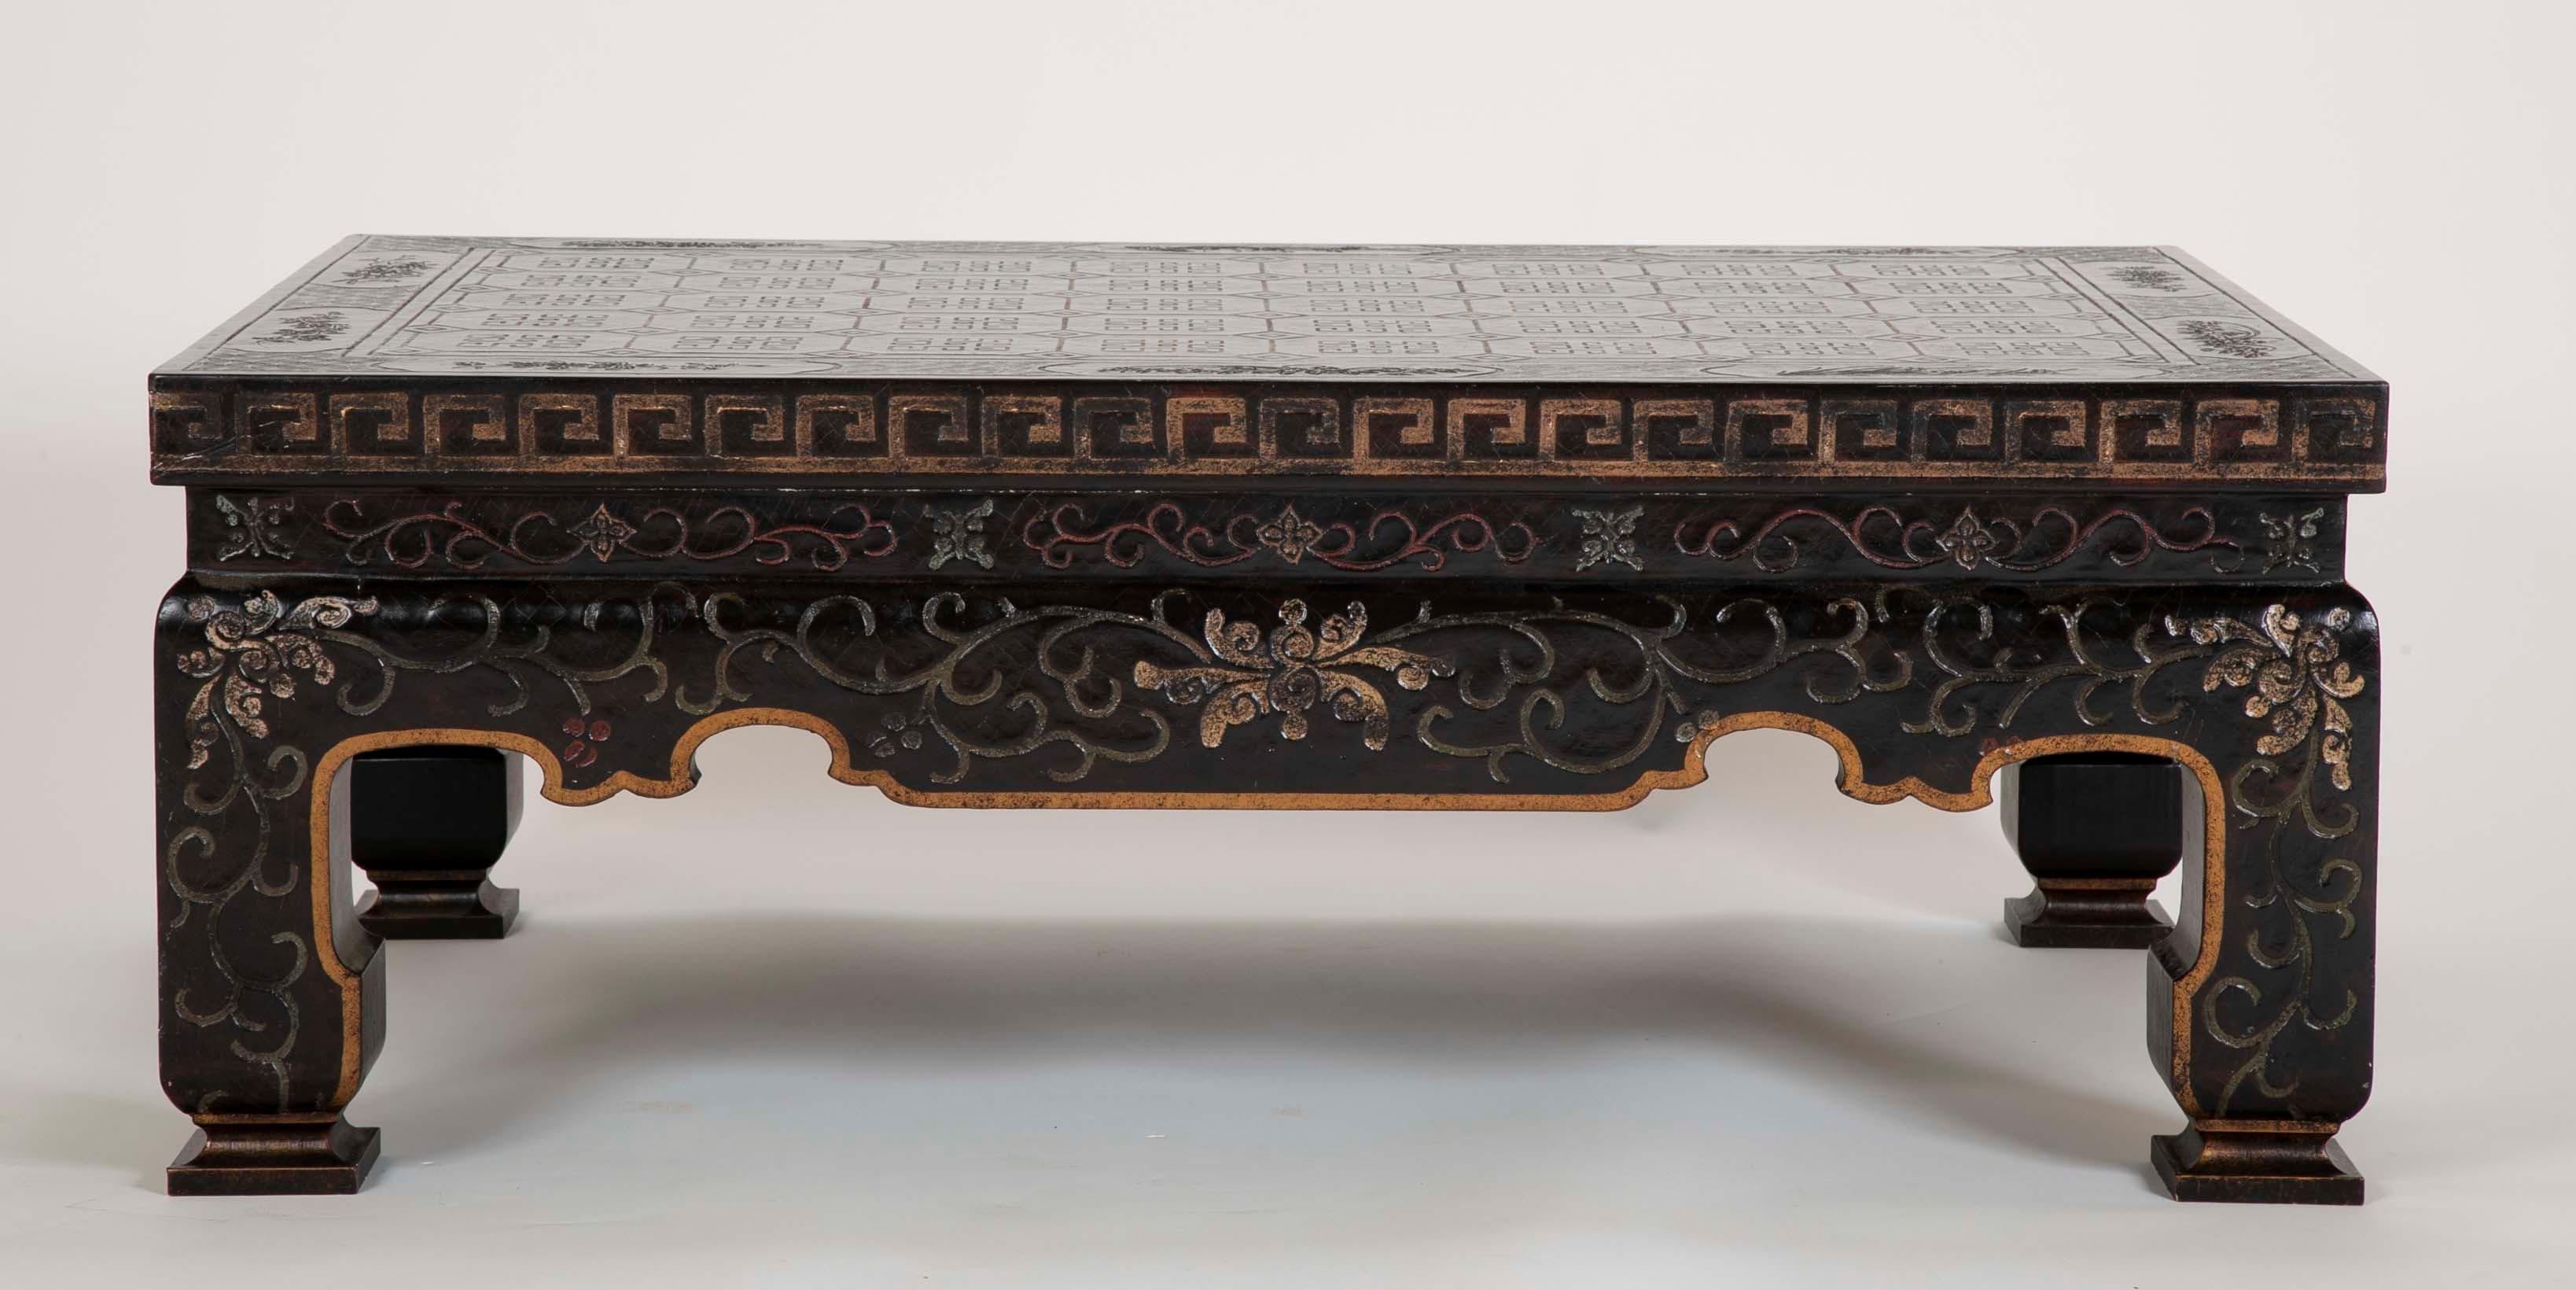 20th Century Midcentury Black Lacquer and Gilt Coffee Table with Chinoiserie Decoration